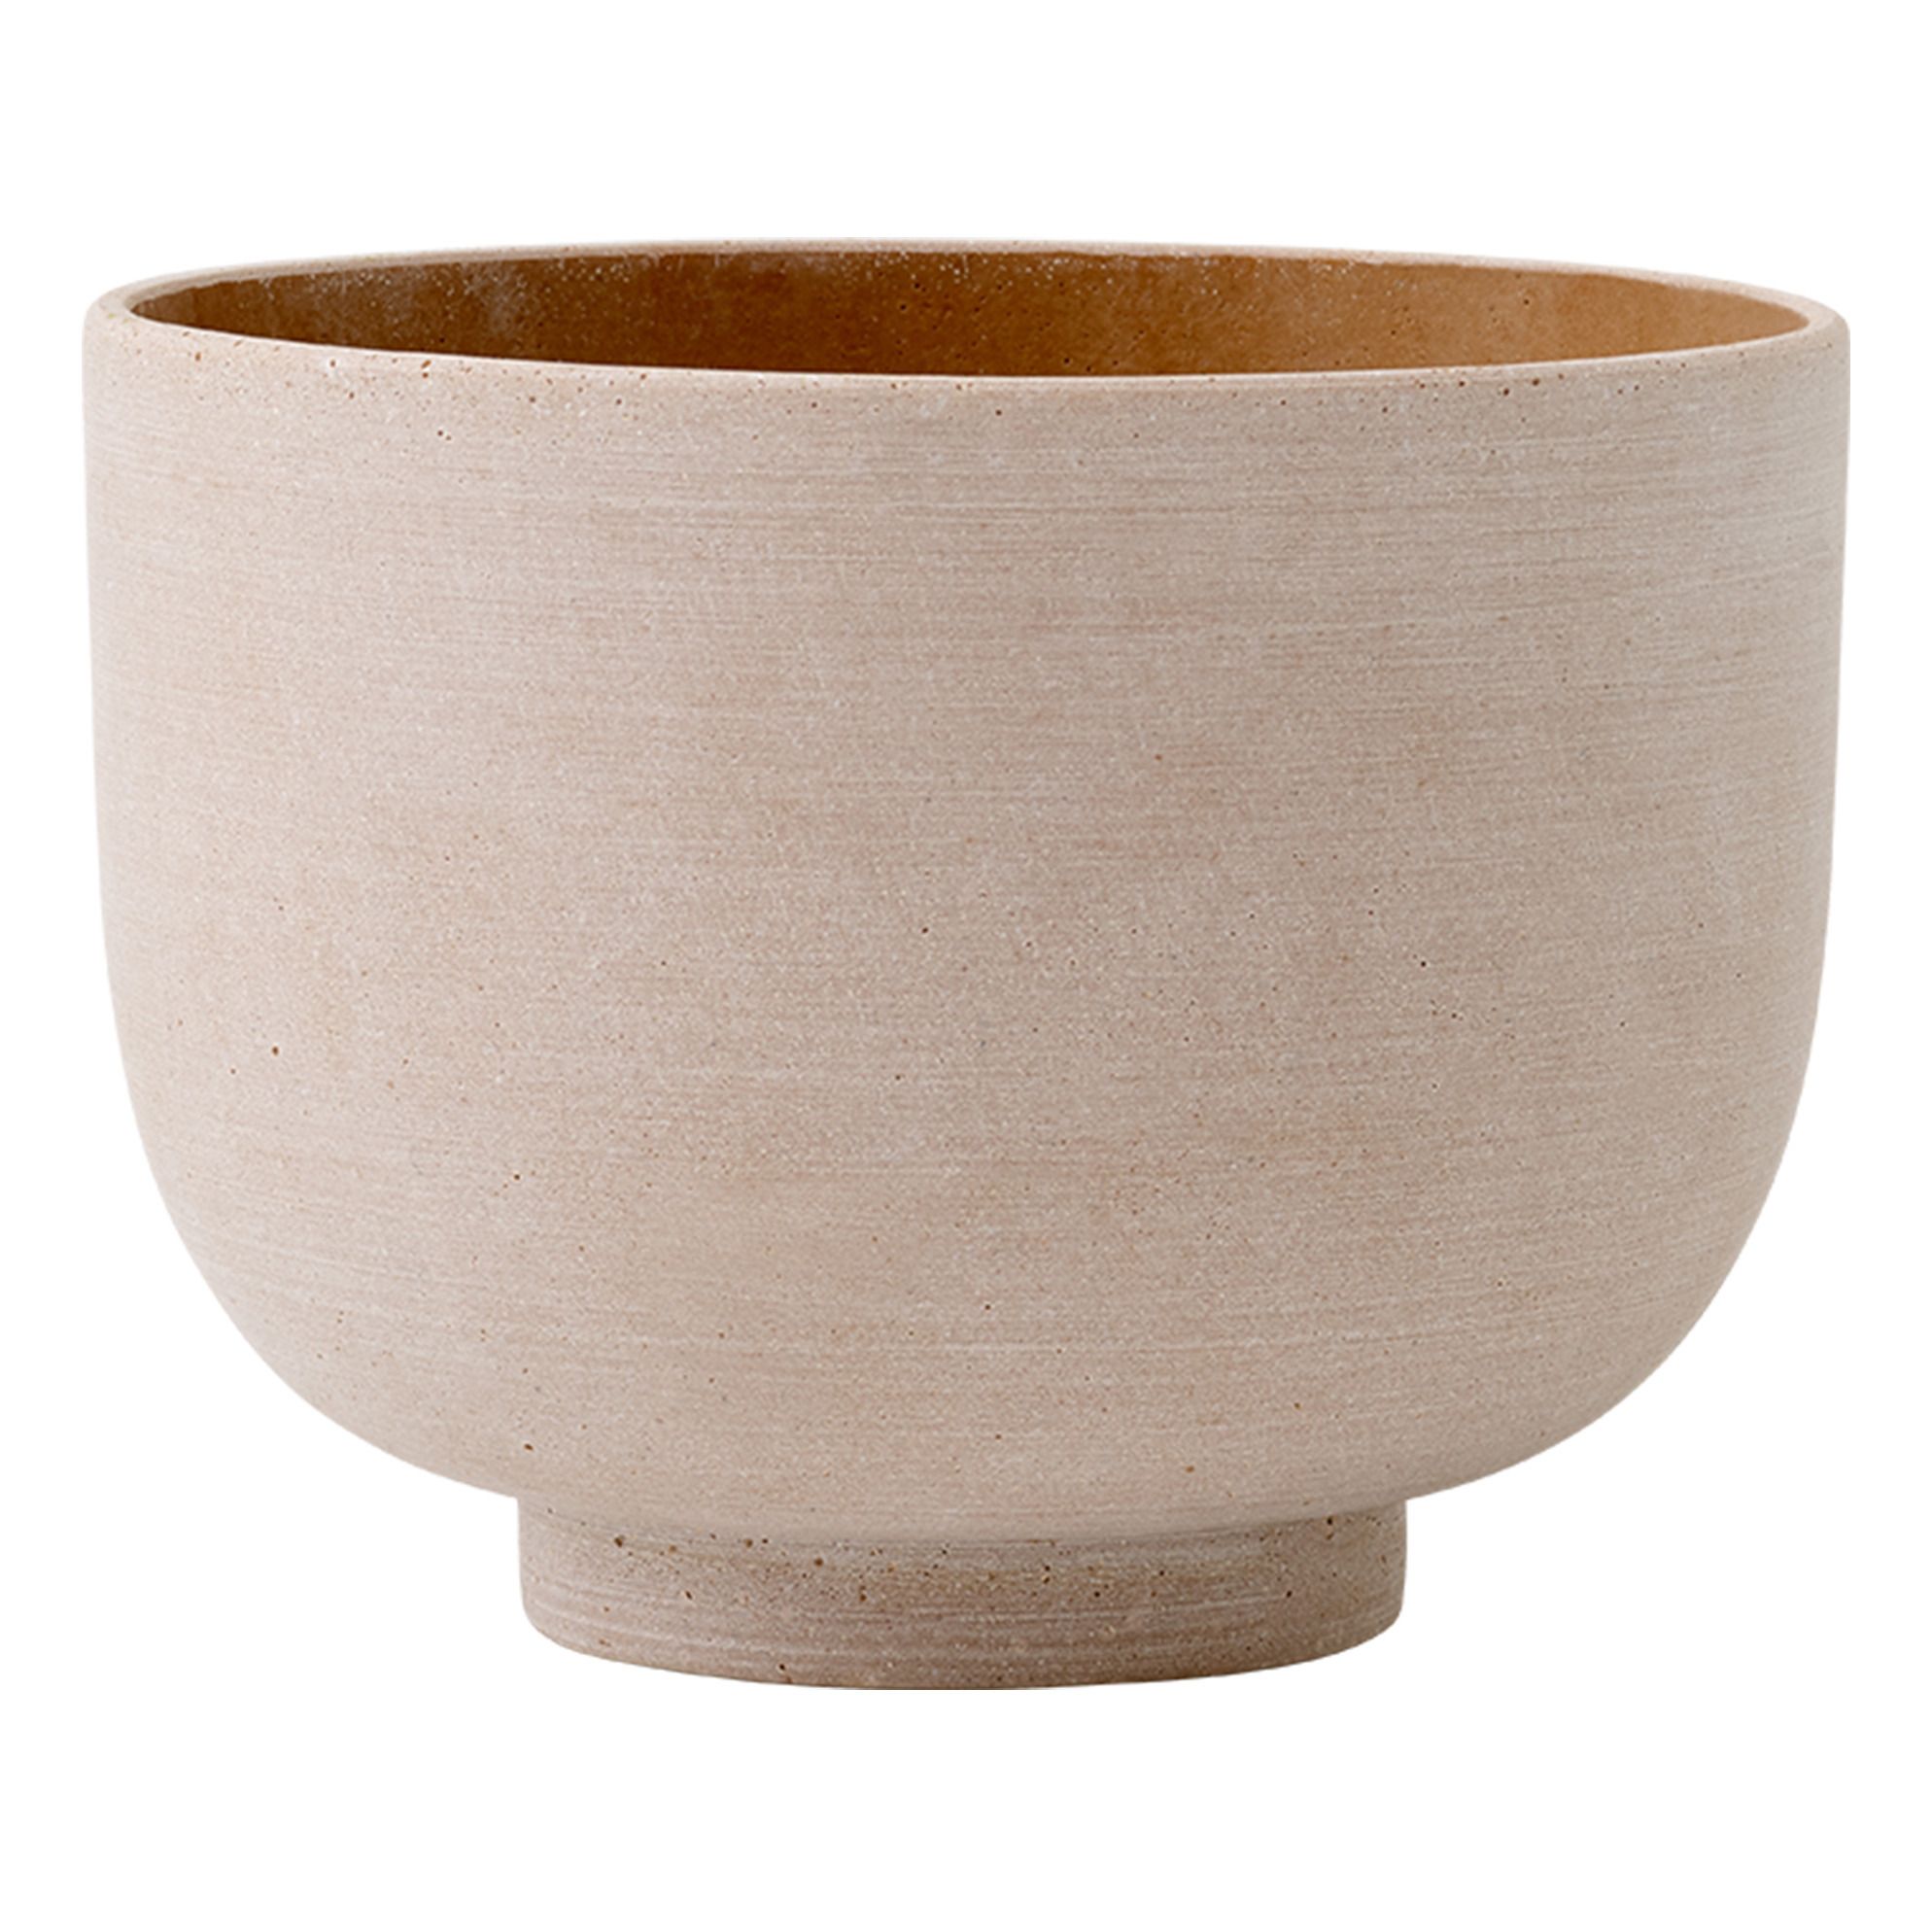 Pot Collect Ocre & Tradition Design Adulte